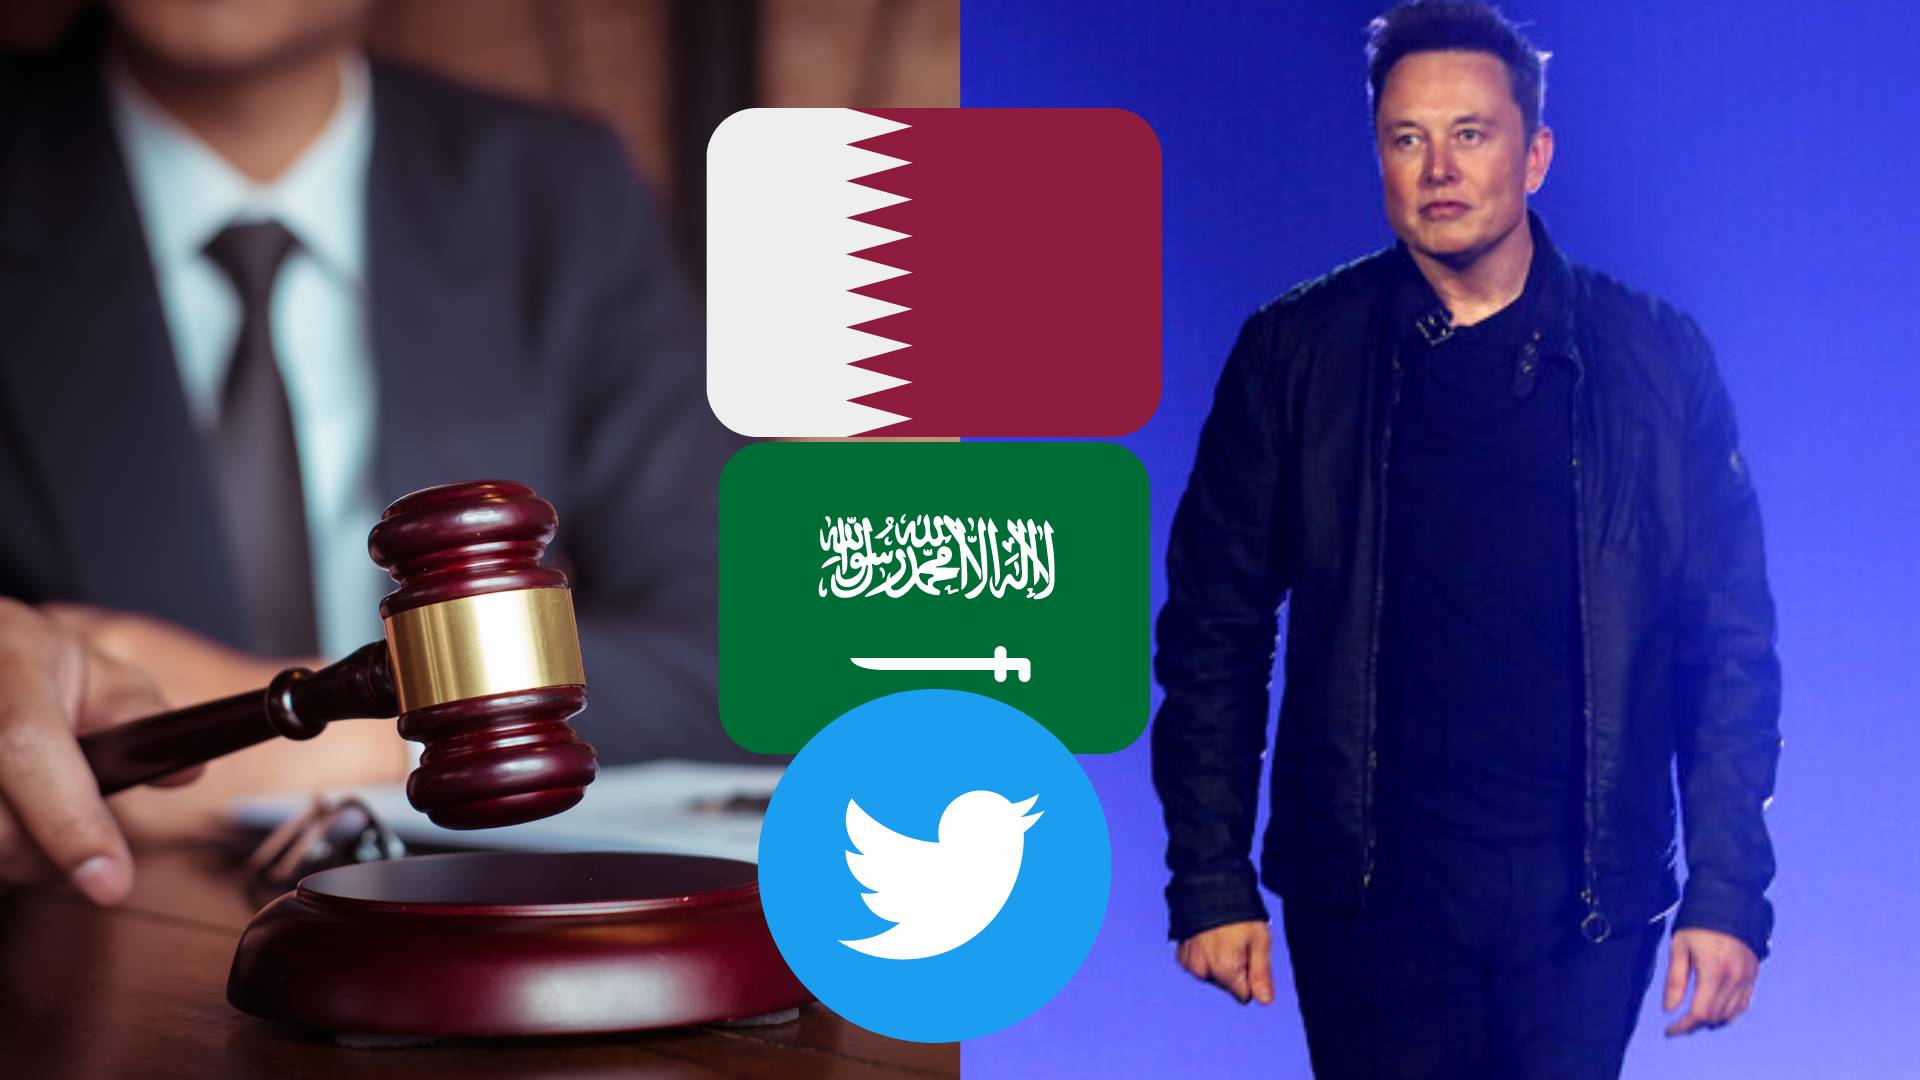 US authorities investigate Musk's intention to grant Saudi and Qatari authorities access to confidential information on Twitter   According to a report, top foreign investors will have access to confidential information about Twitter's finances, and possibly its users, under the terms of Elon Musk's deal to buy this social media site.